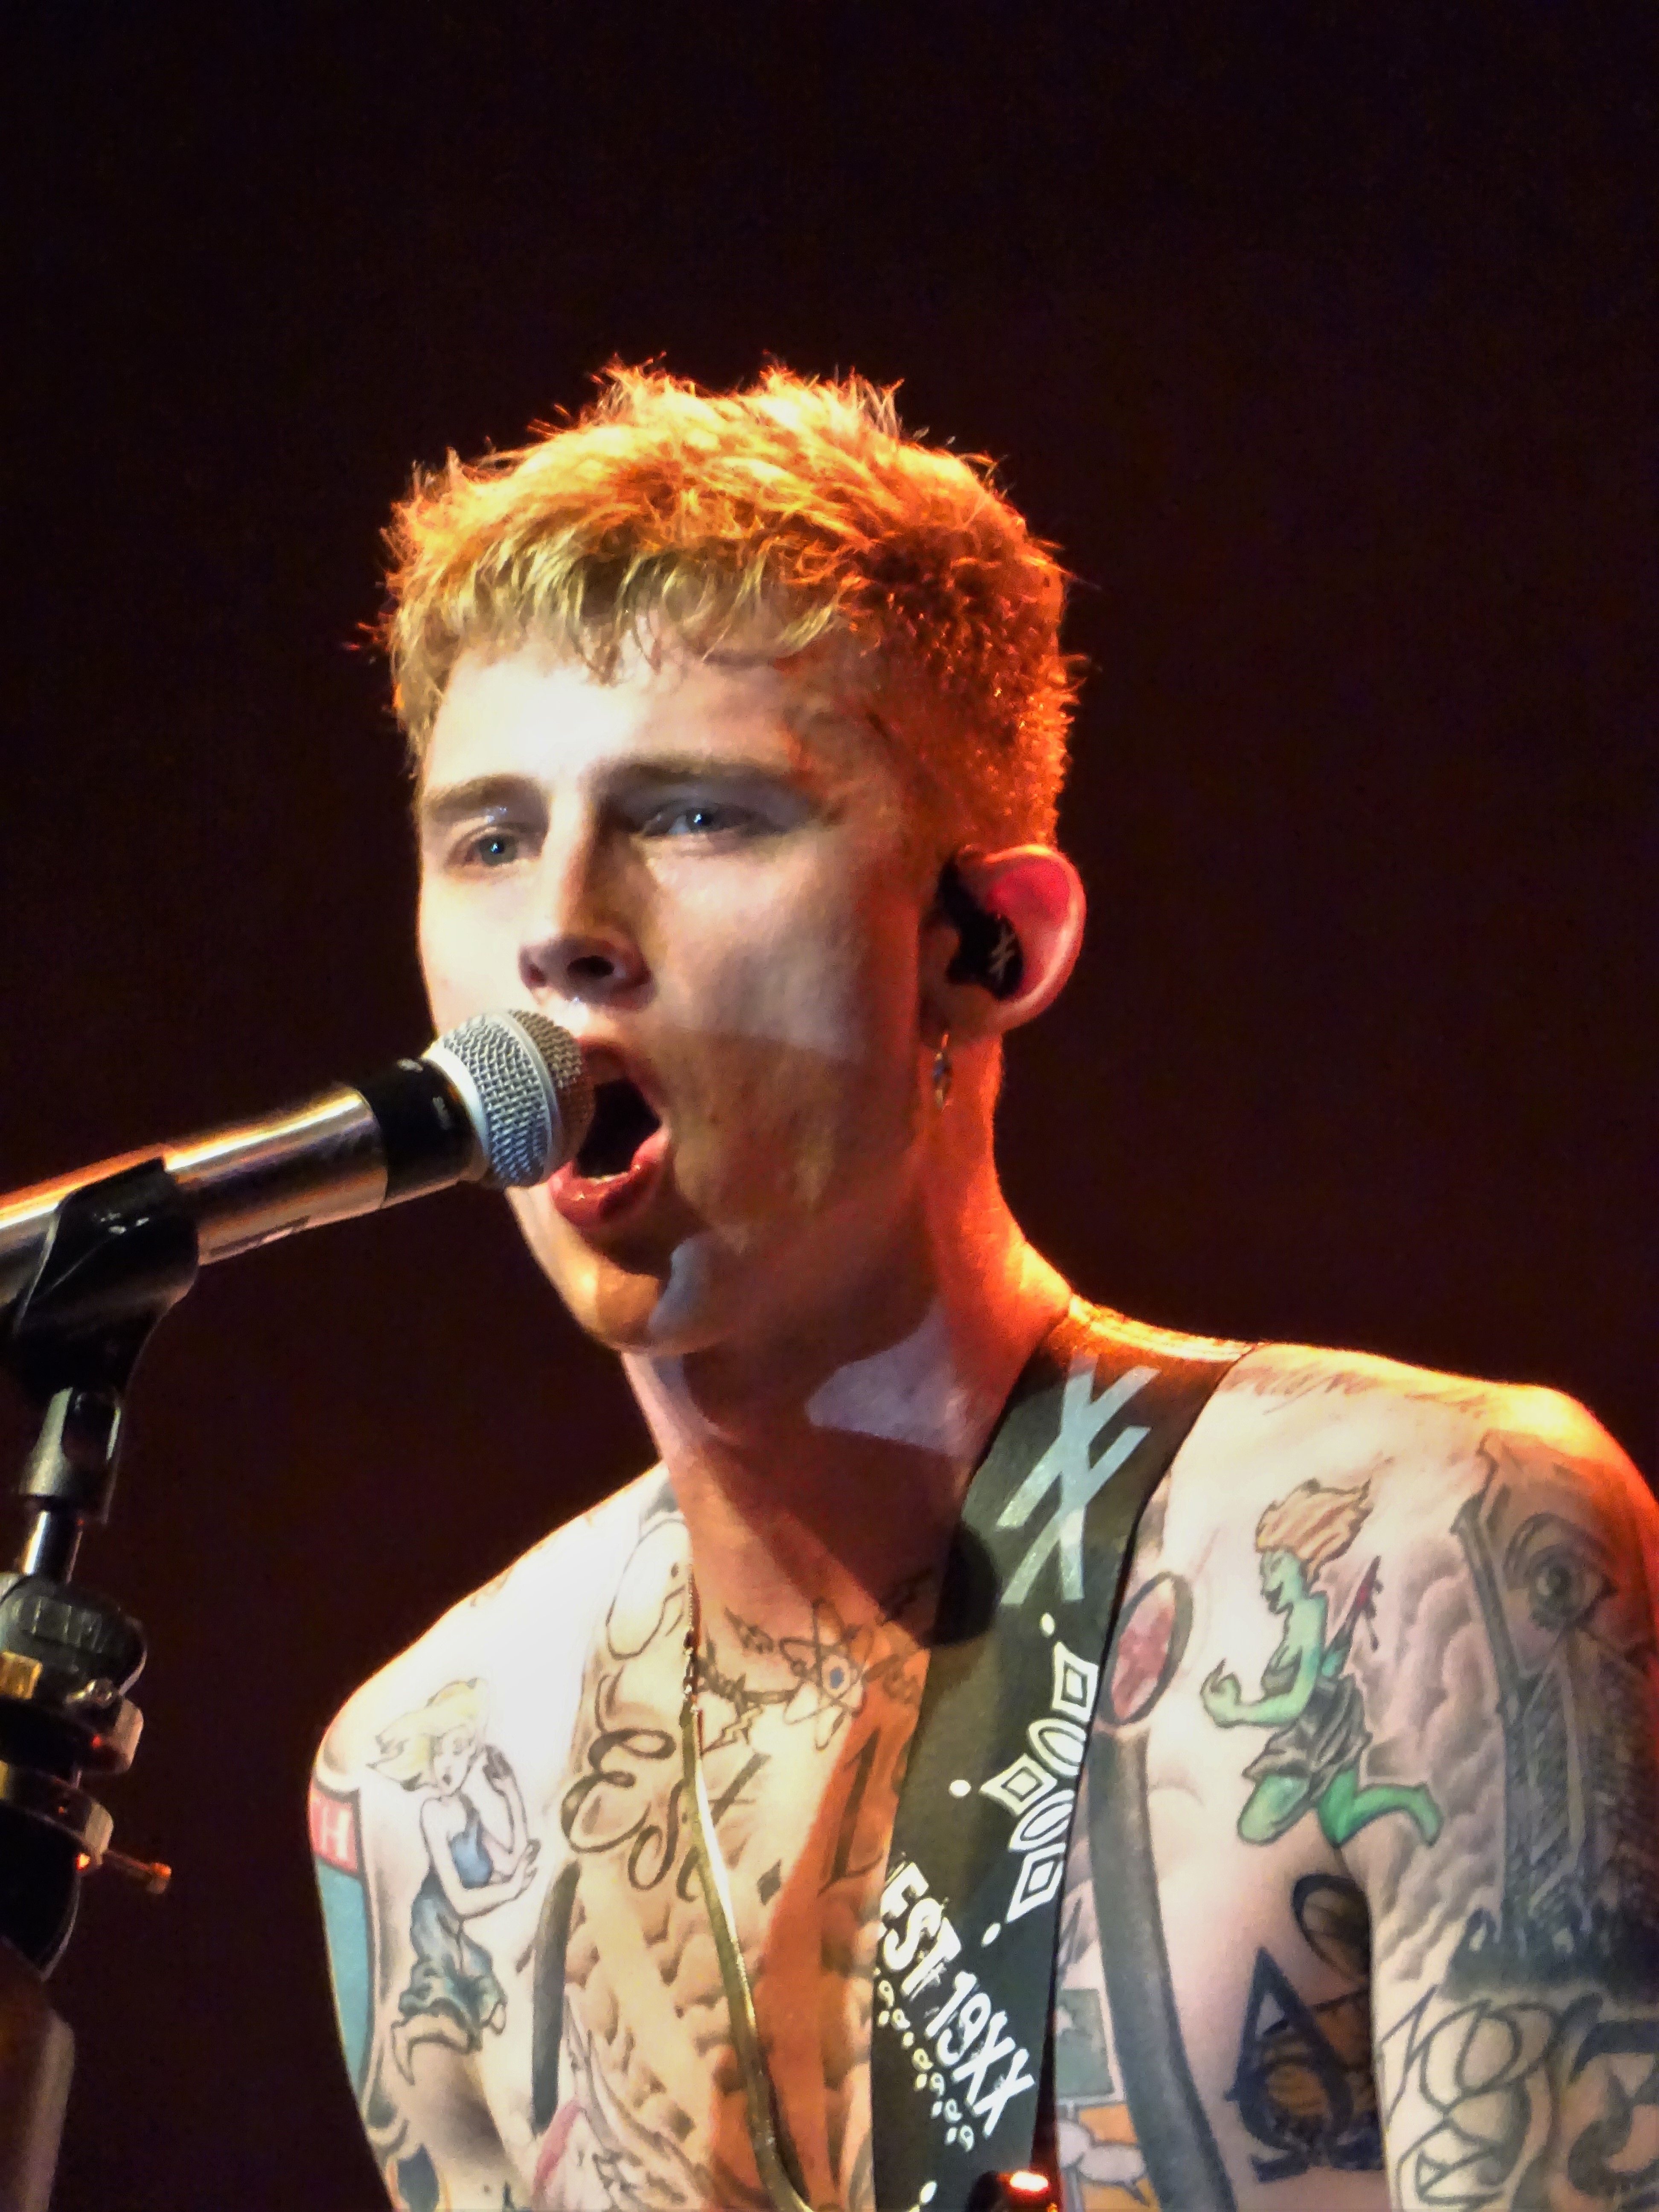 Machine Gun Kelly from Pop-Punk to 'PRESSURE' with rap track